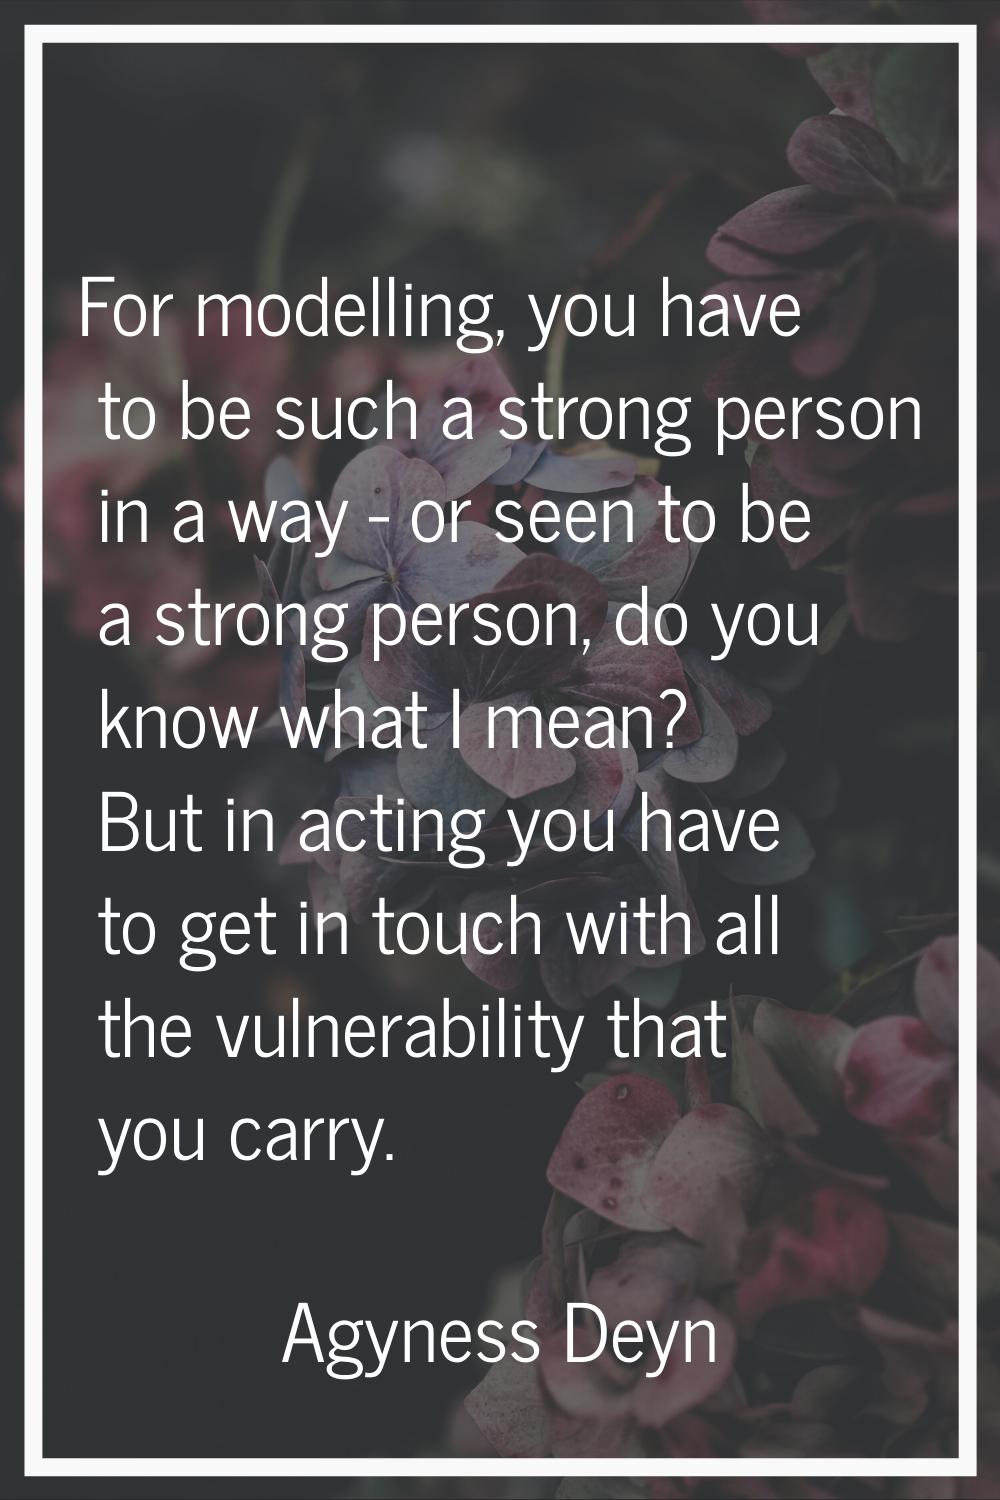 For modelling, you have to be such a strong person in a way - or seen to be a strong person, do you